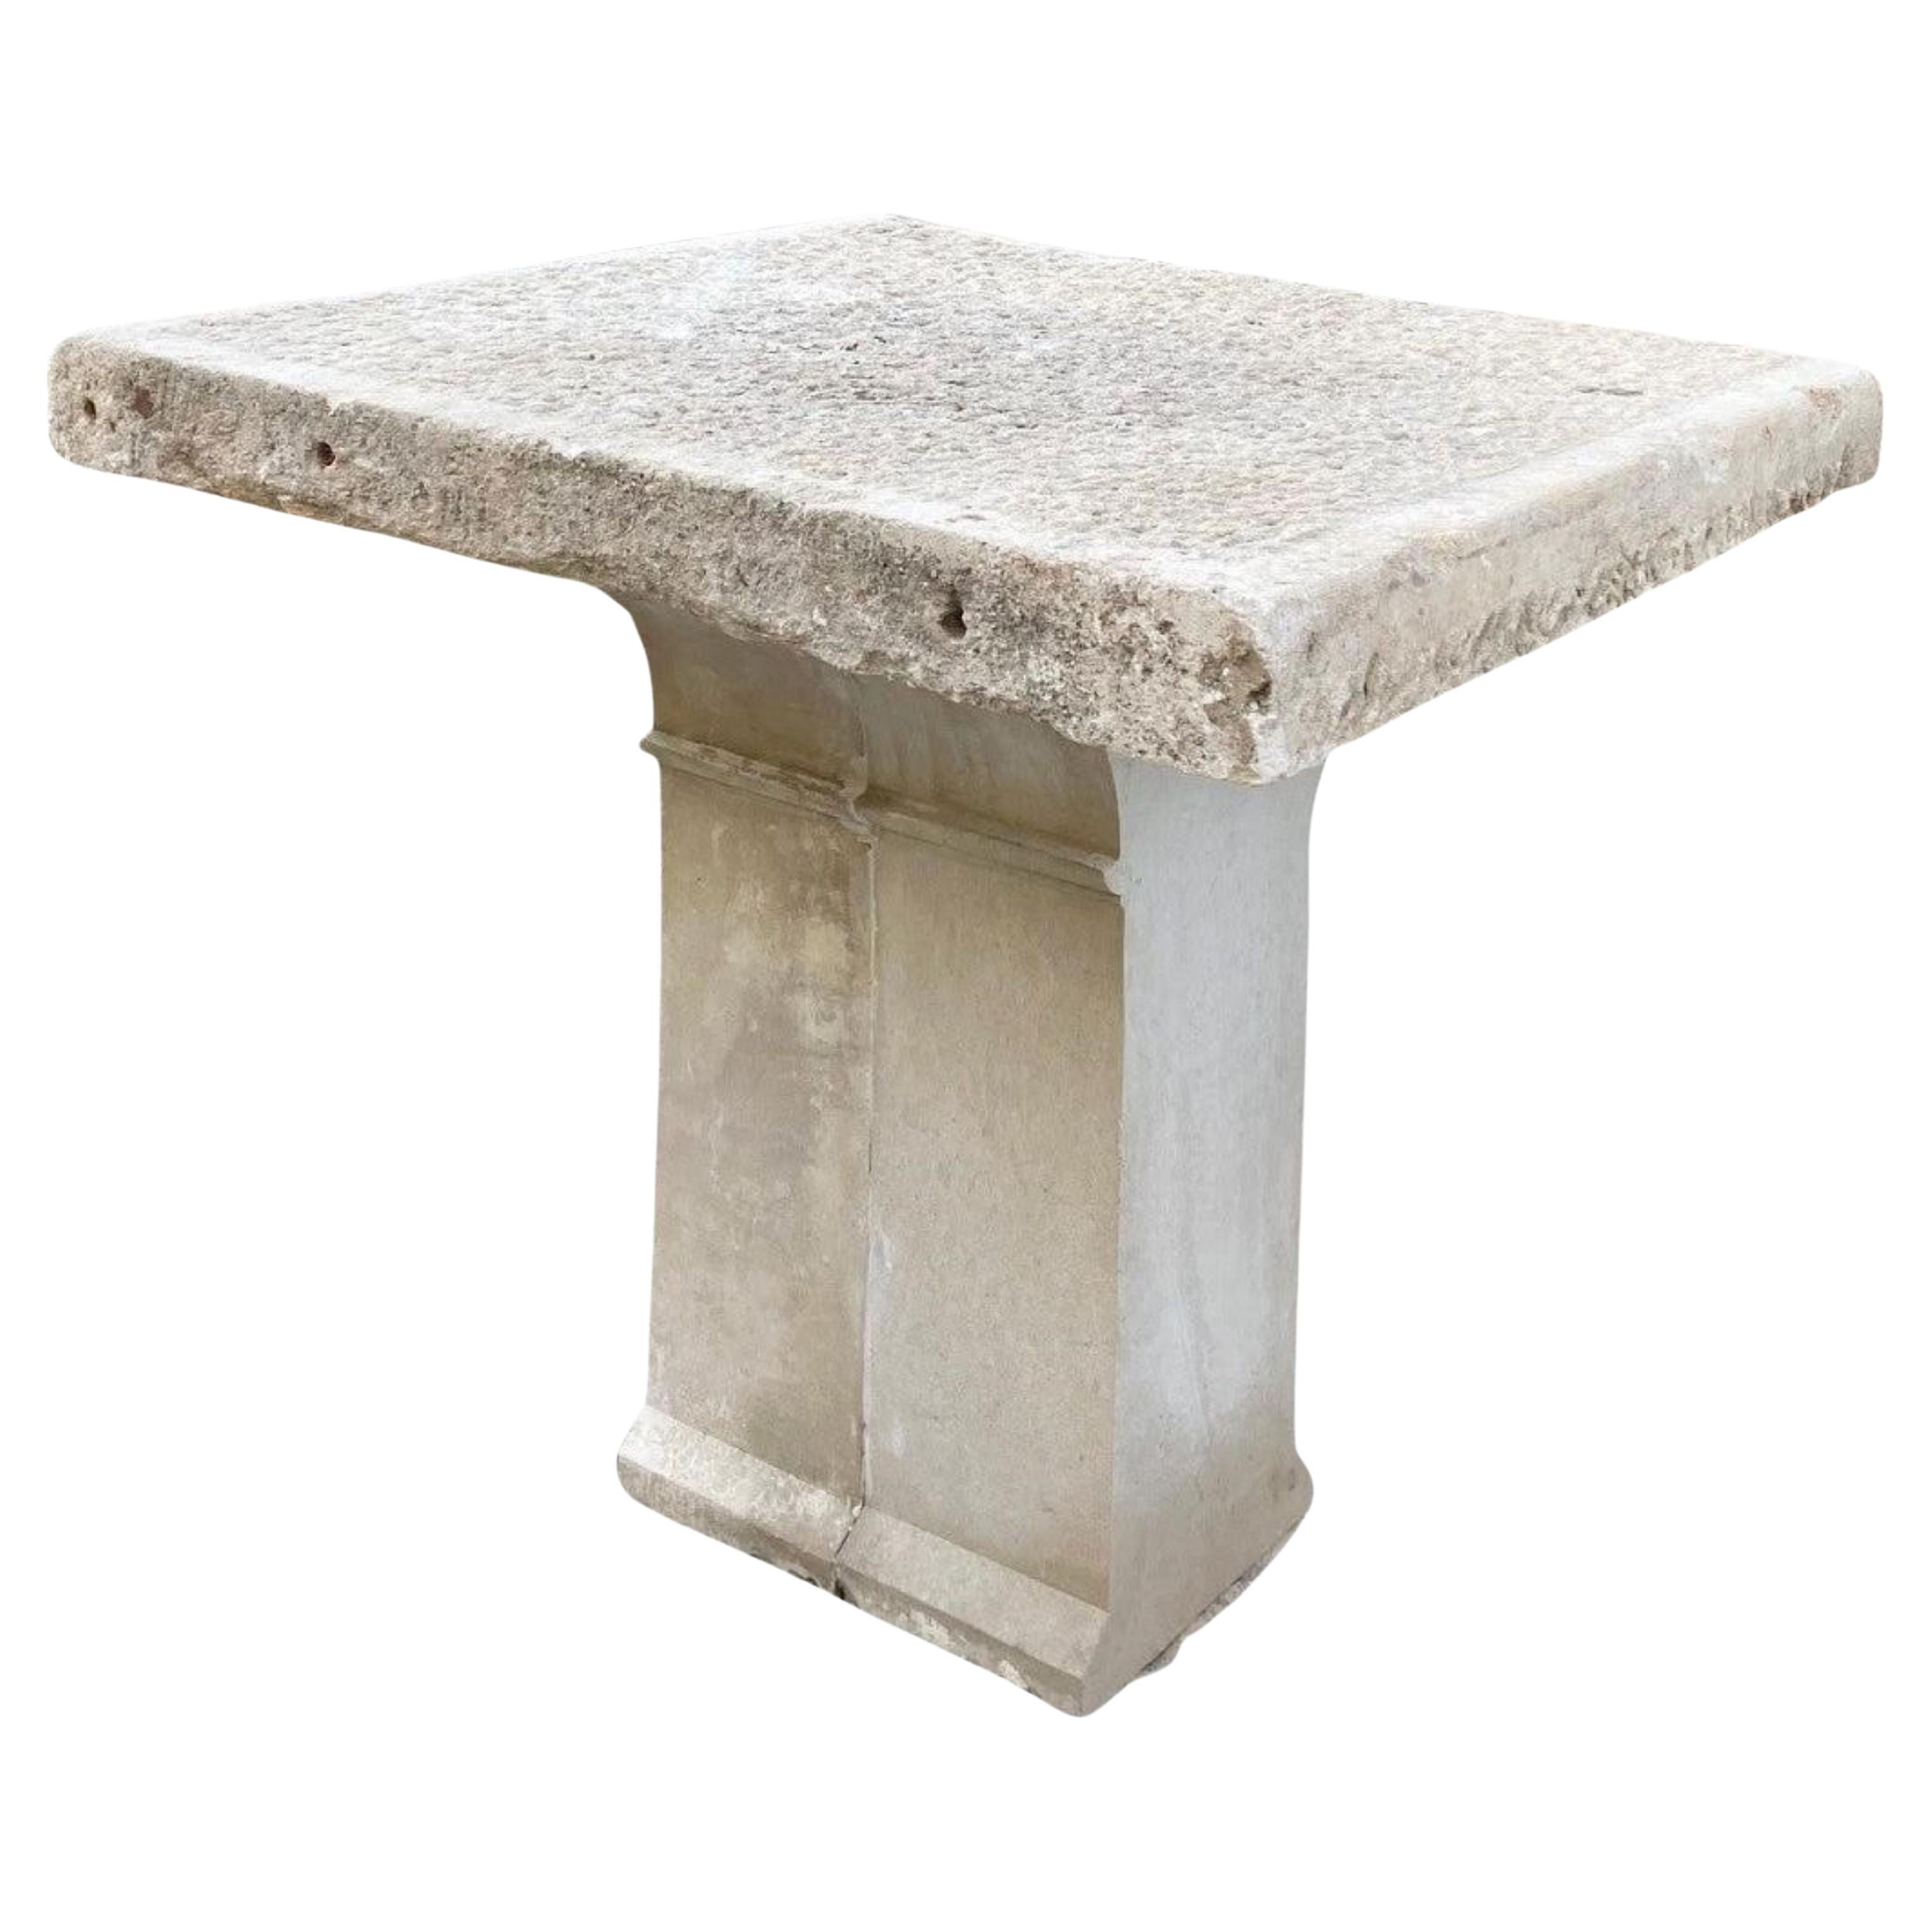 19th Century Hand Carved Stone Antique Garden Coffee Outdoor Indoor Table Farm